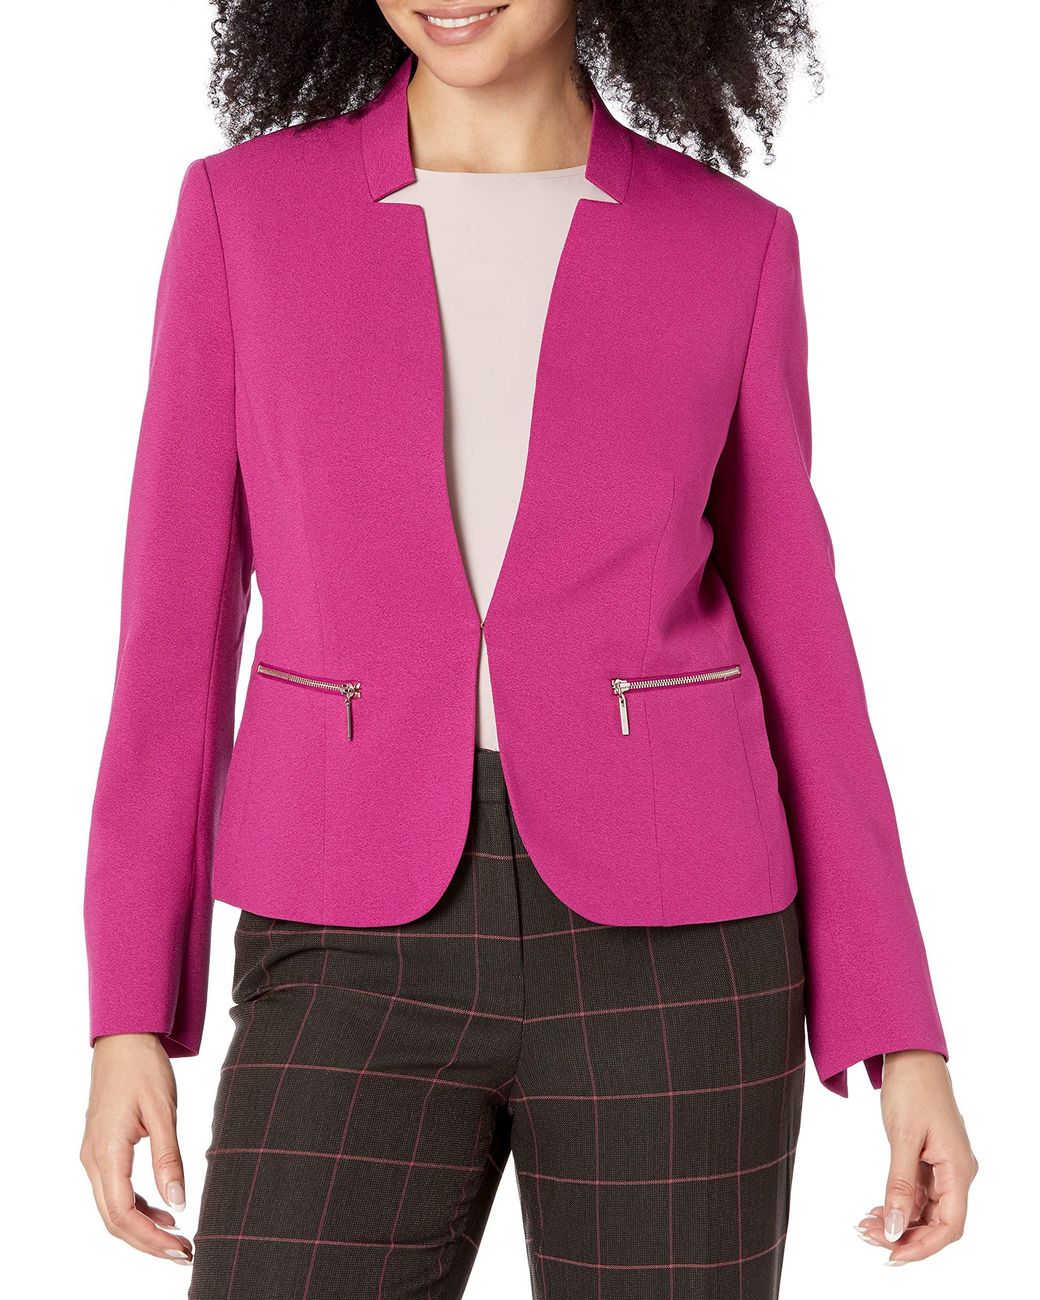 Kasper Cut Out Collar Crepe Kissing Jacket in Pink | Lyst